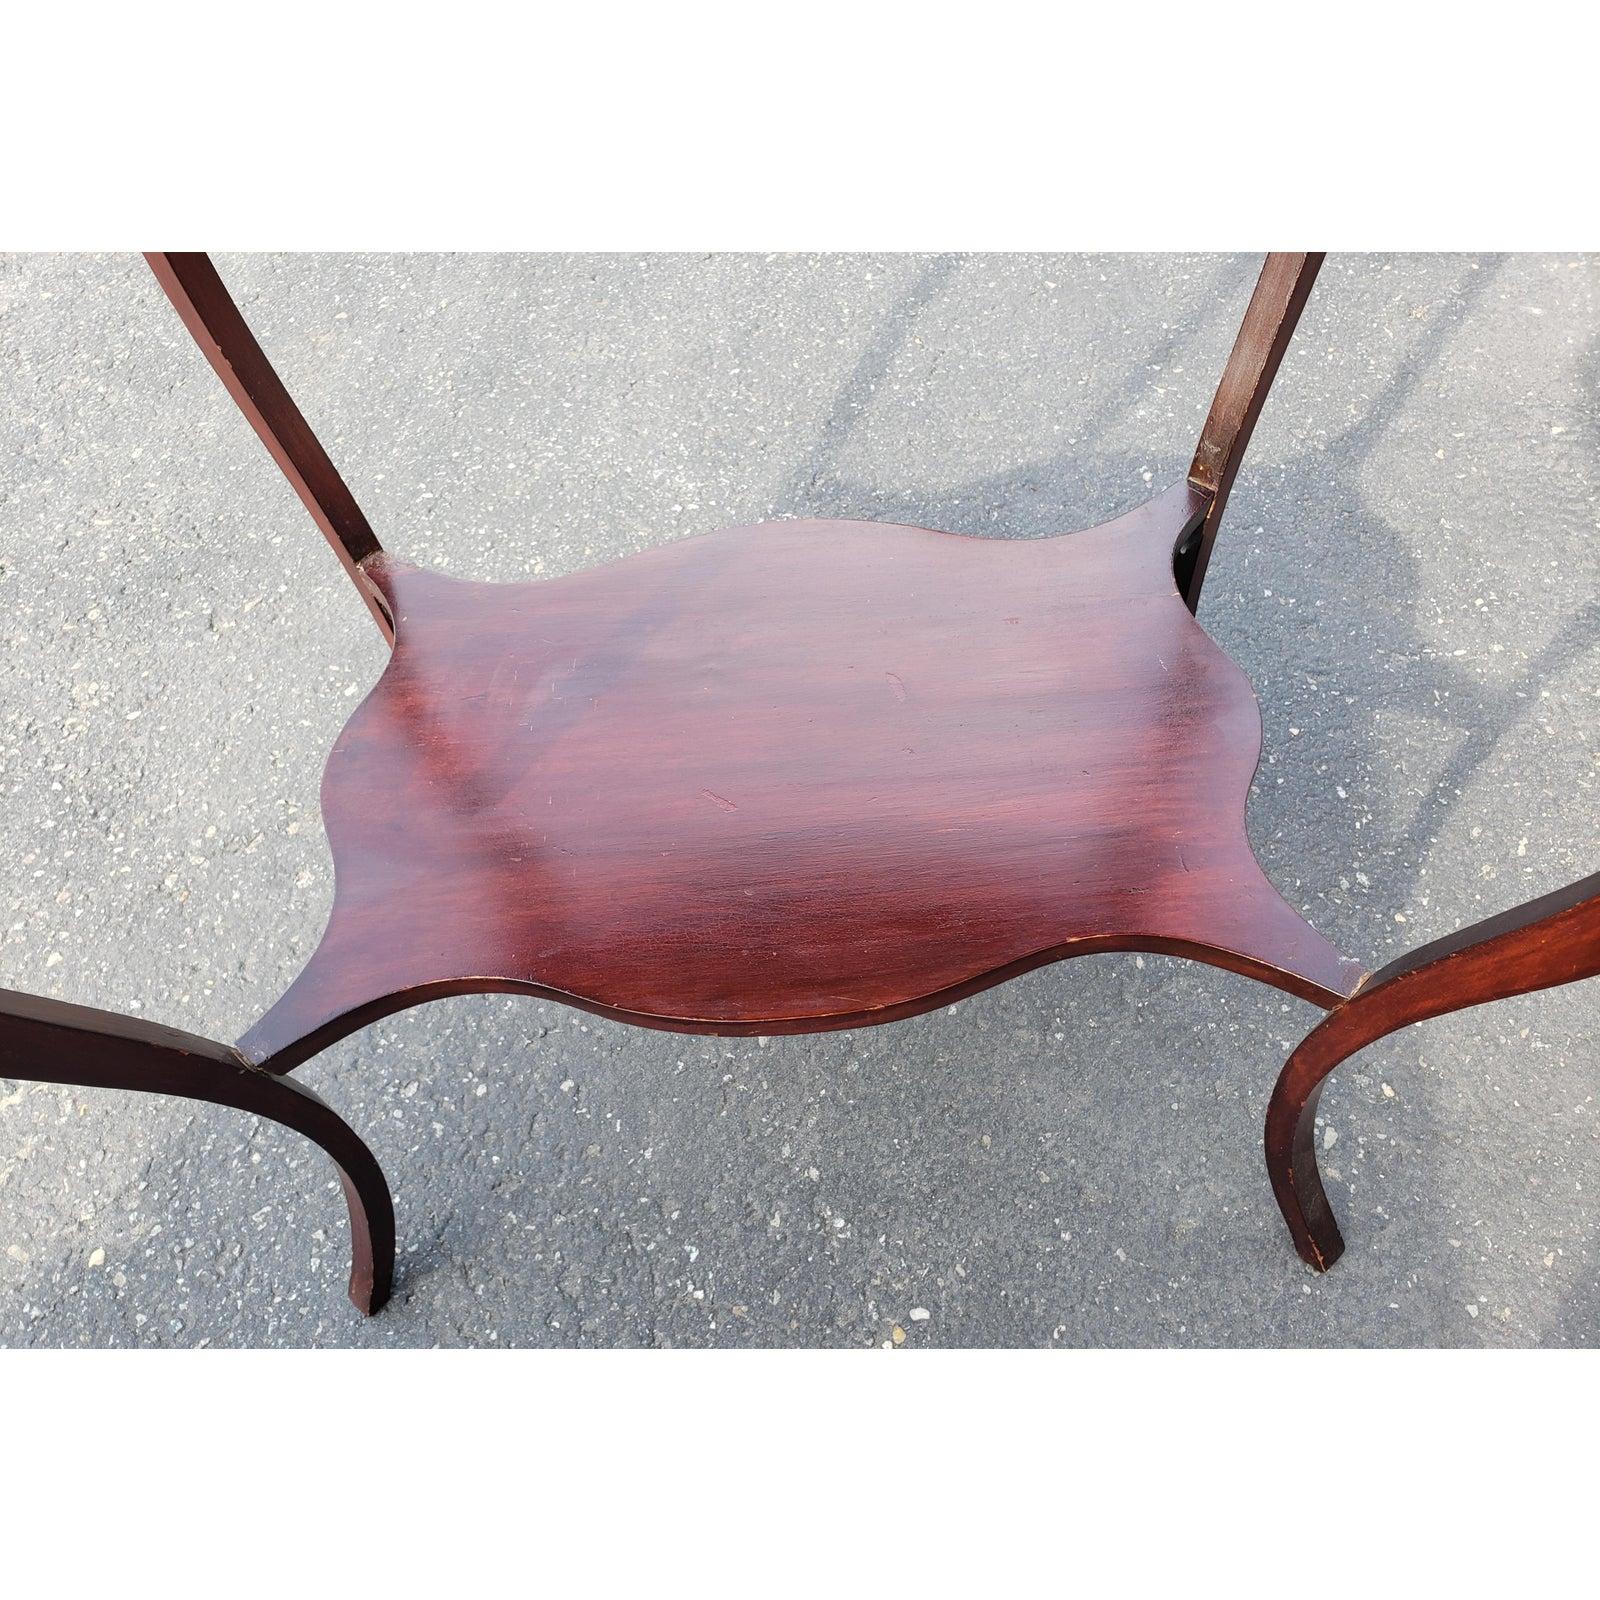 British Colonial 1800s Georgian Solid Mahogany Accent Table For Sale